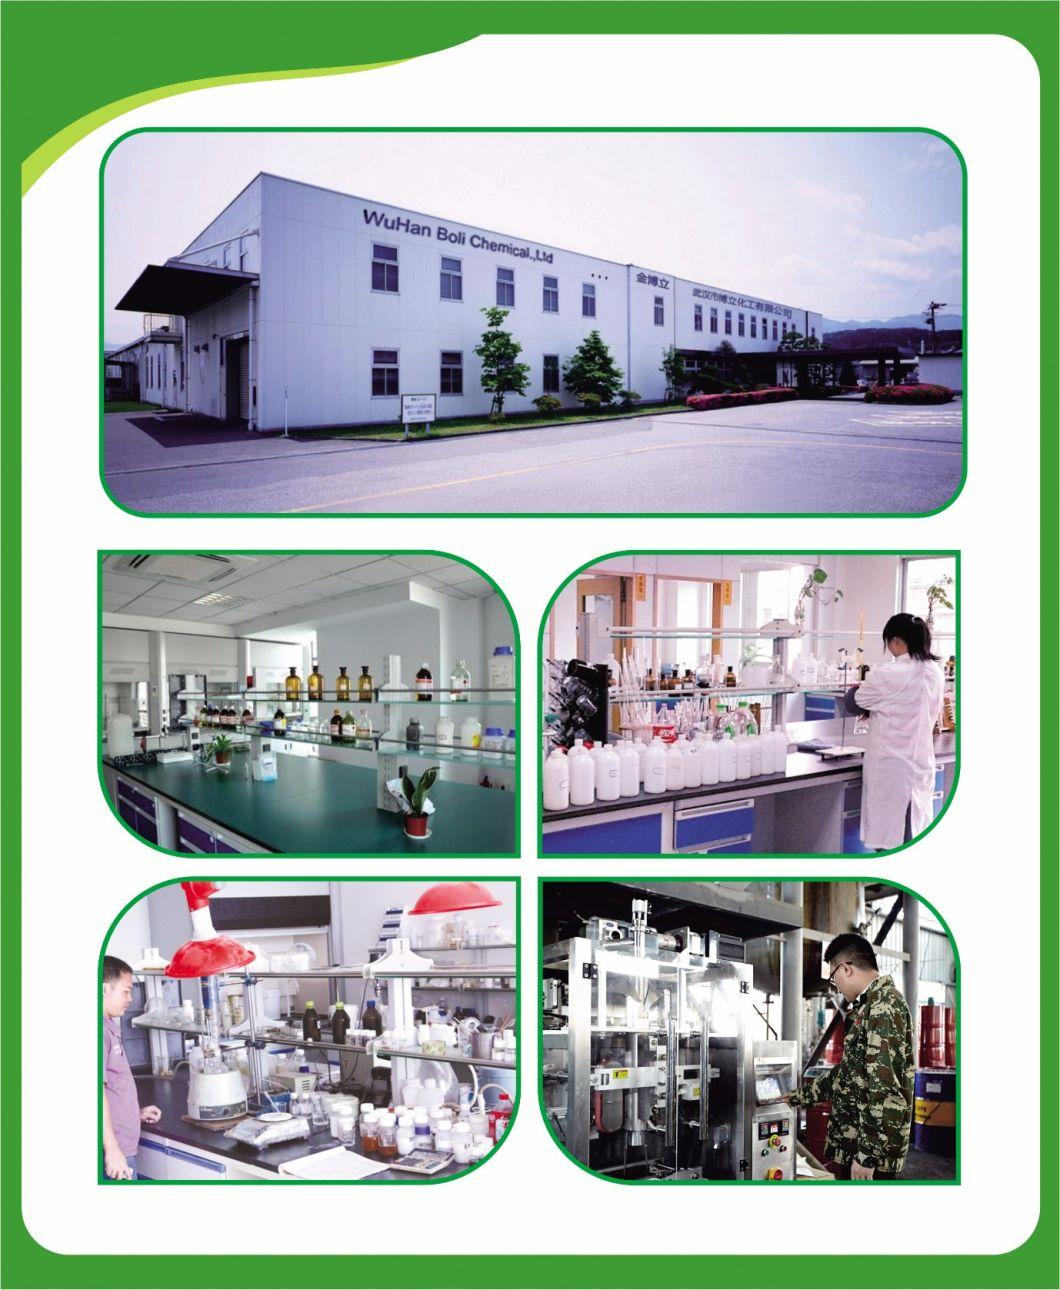 China Supplier GBL Economic All-Purpose Sbs Spray Adhesive